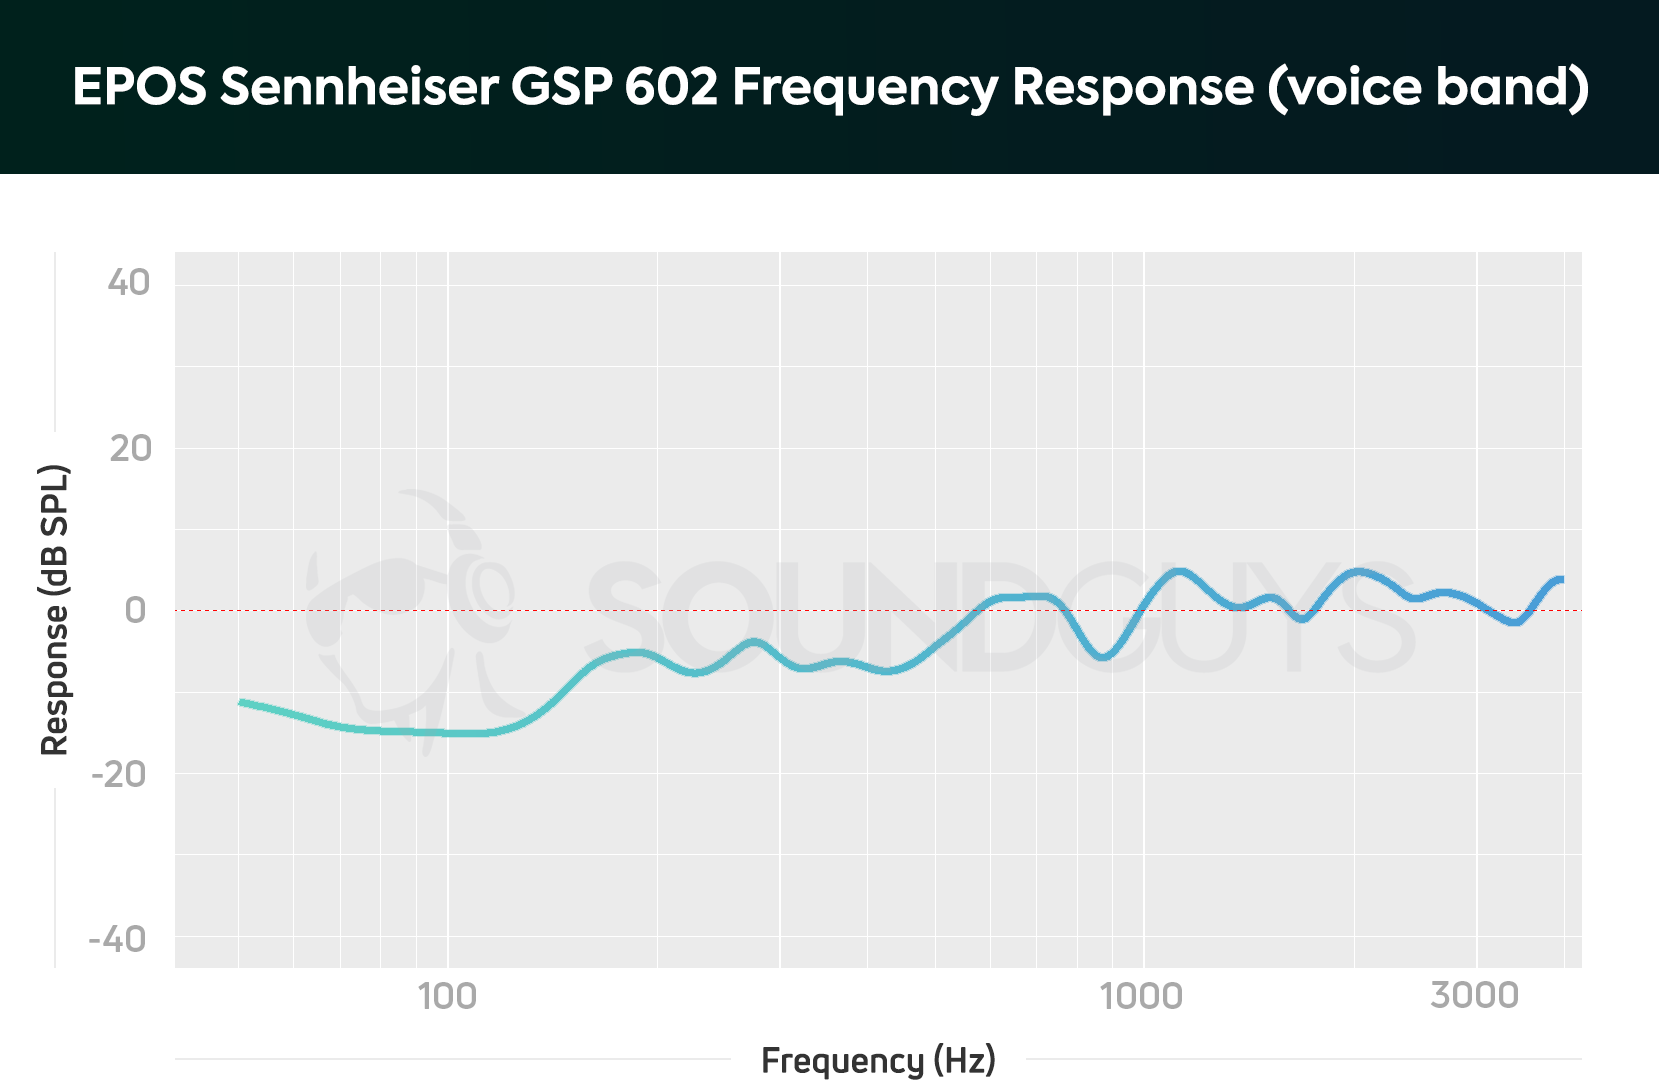 A frequency response chart for the EPOS Sennheiser GSP 602 gaming headset microphone, which shows a notable de-emphasis in the bass range.